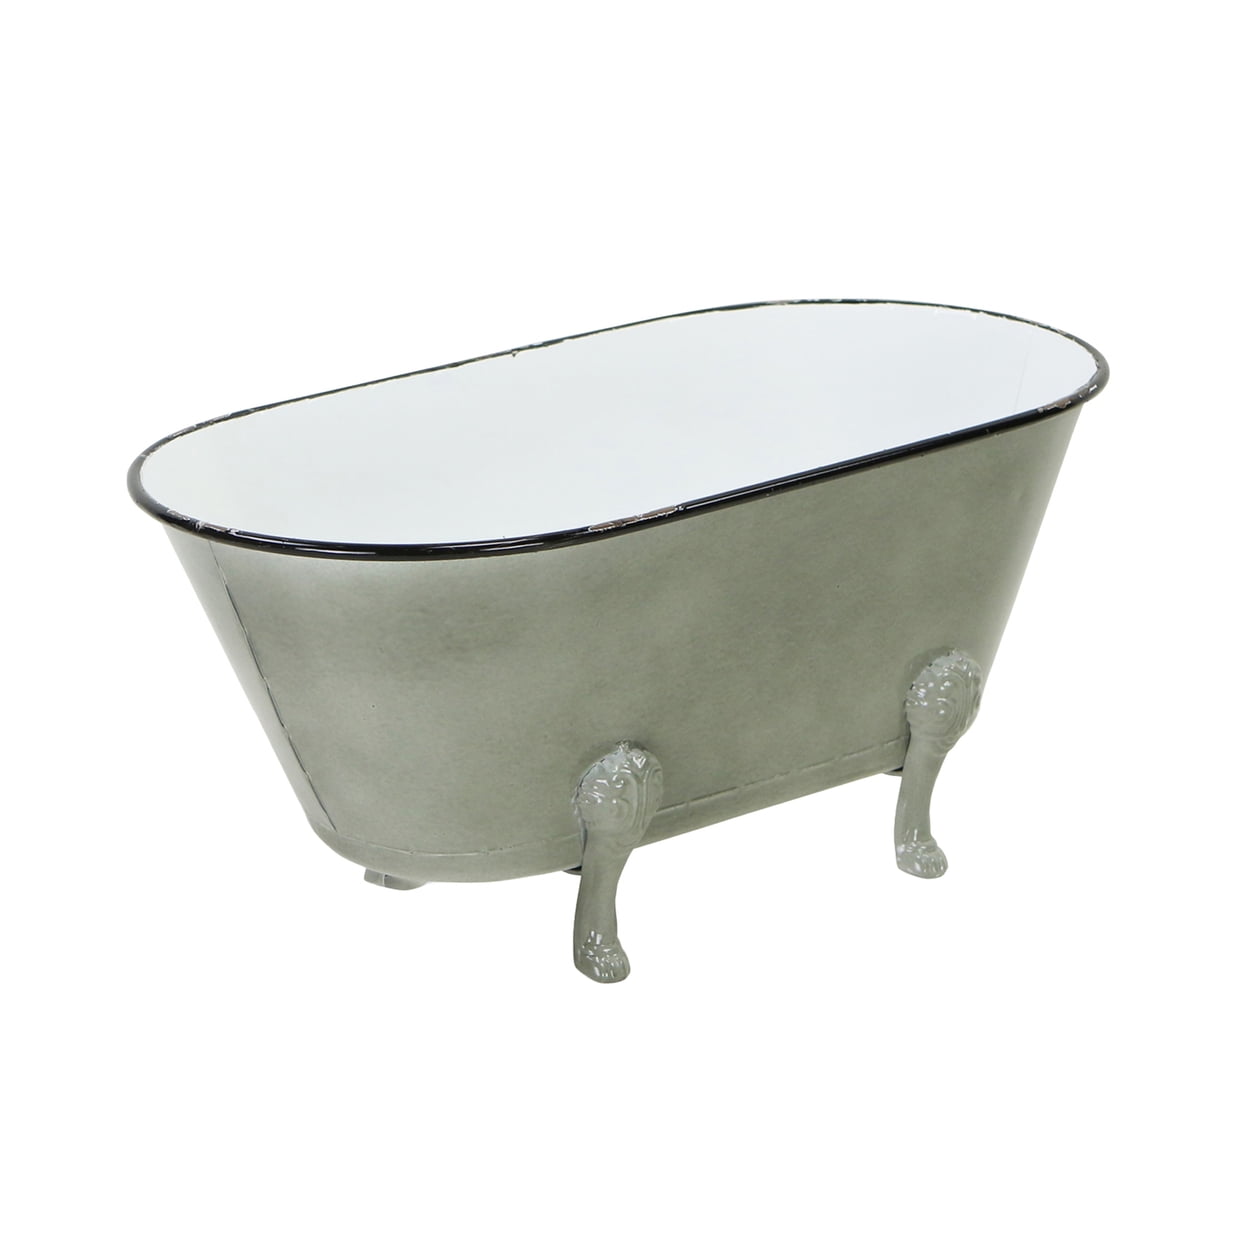 Picture of Cheungs 5018S Metal Lacquered Gray Tub Decor